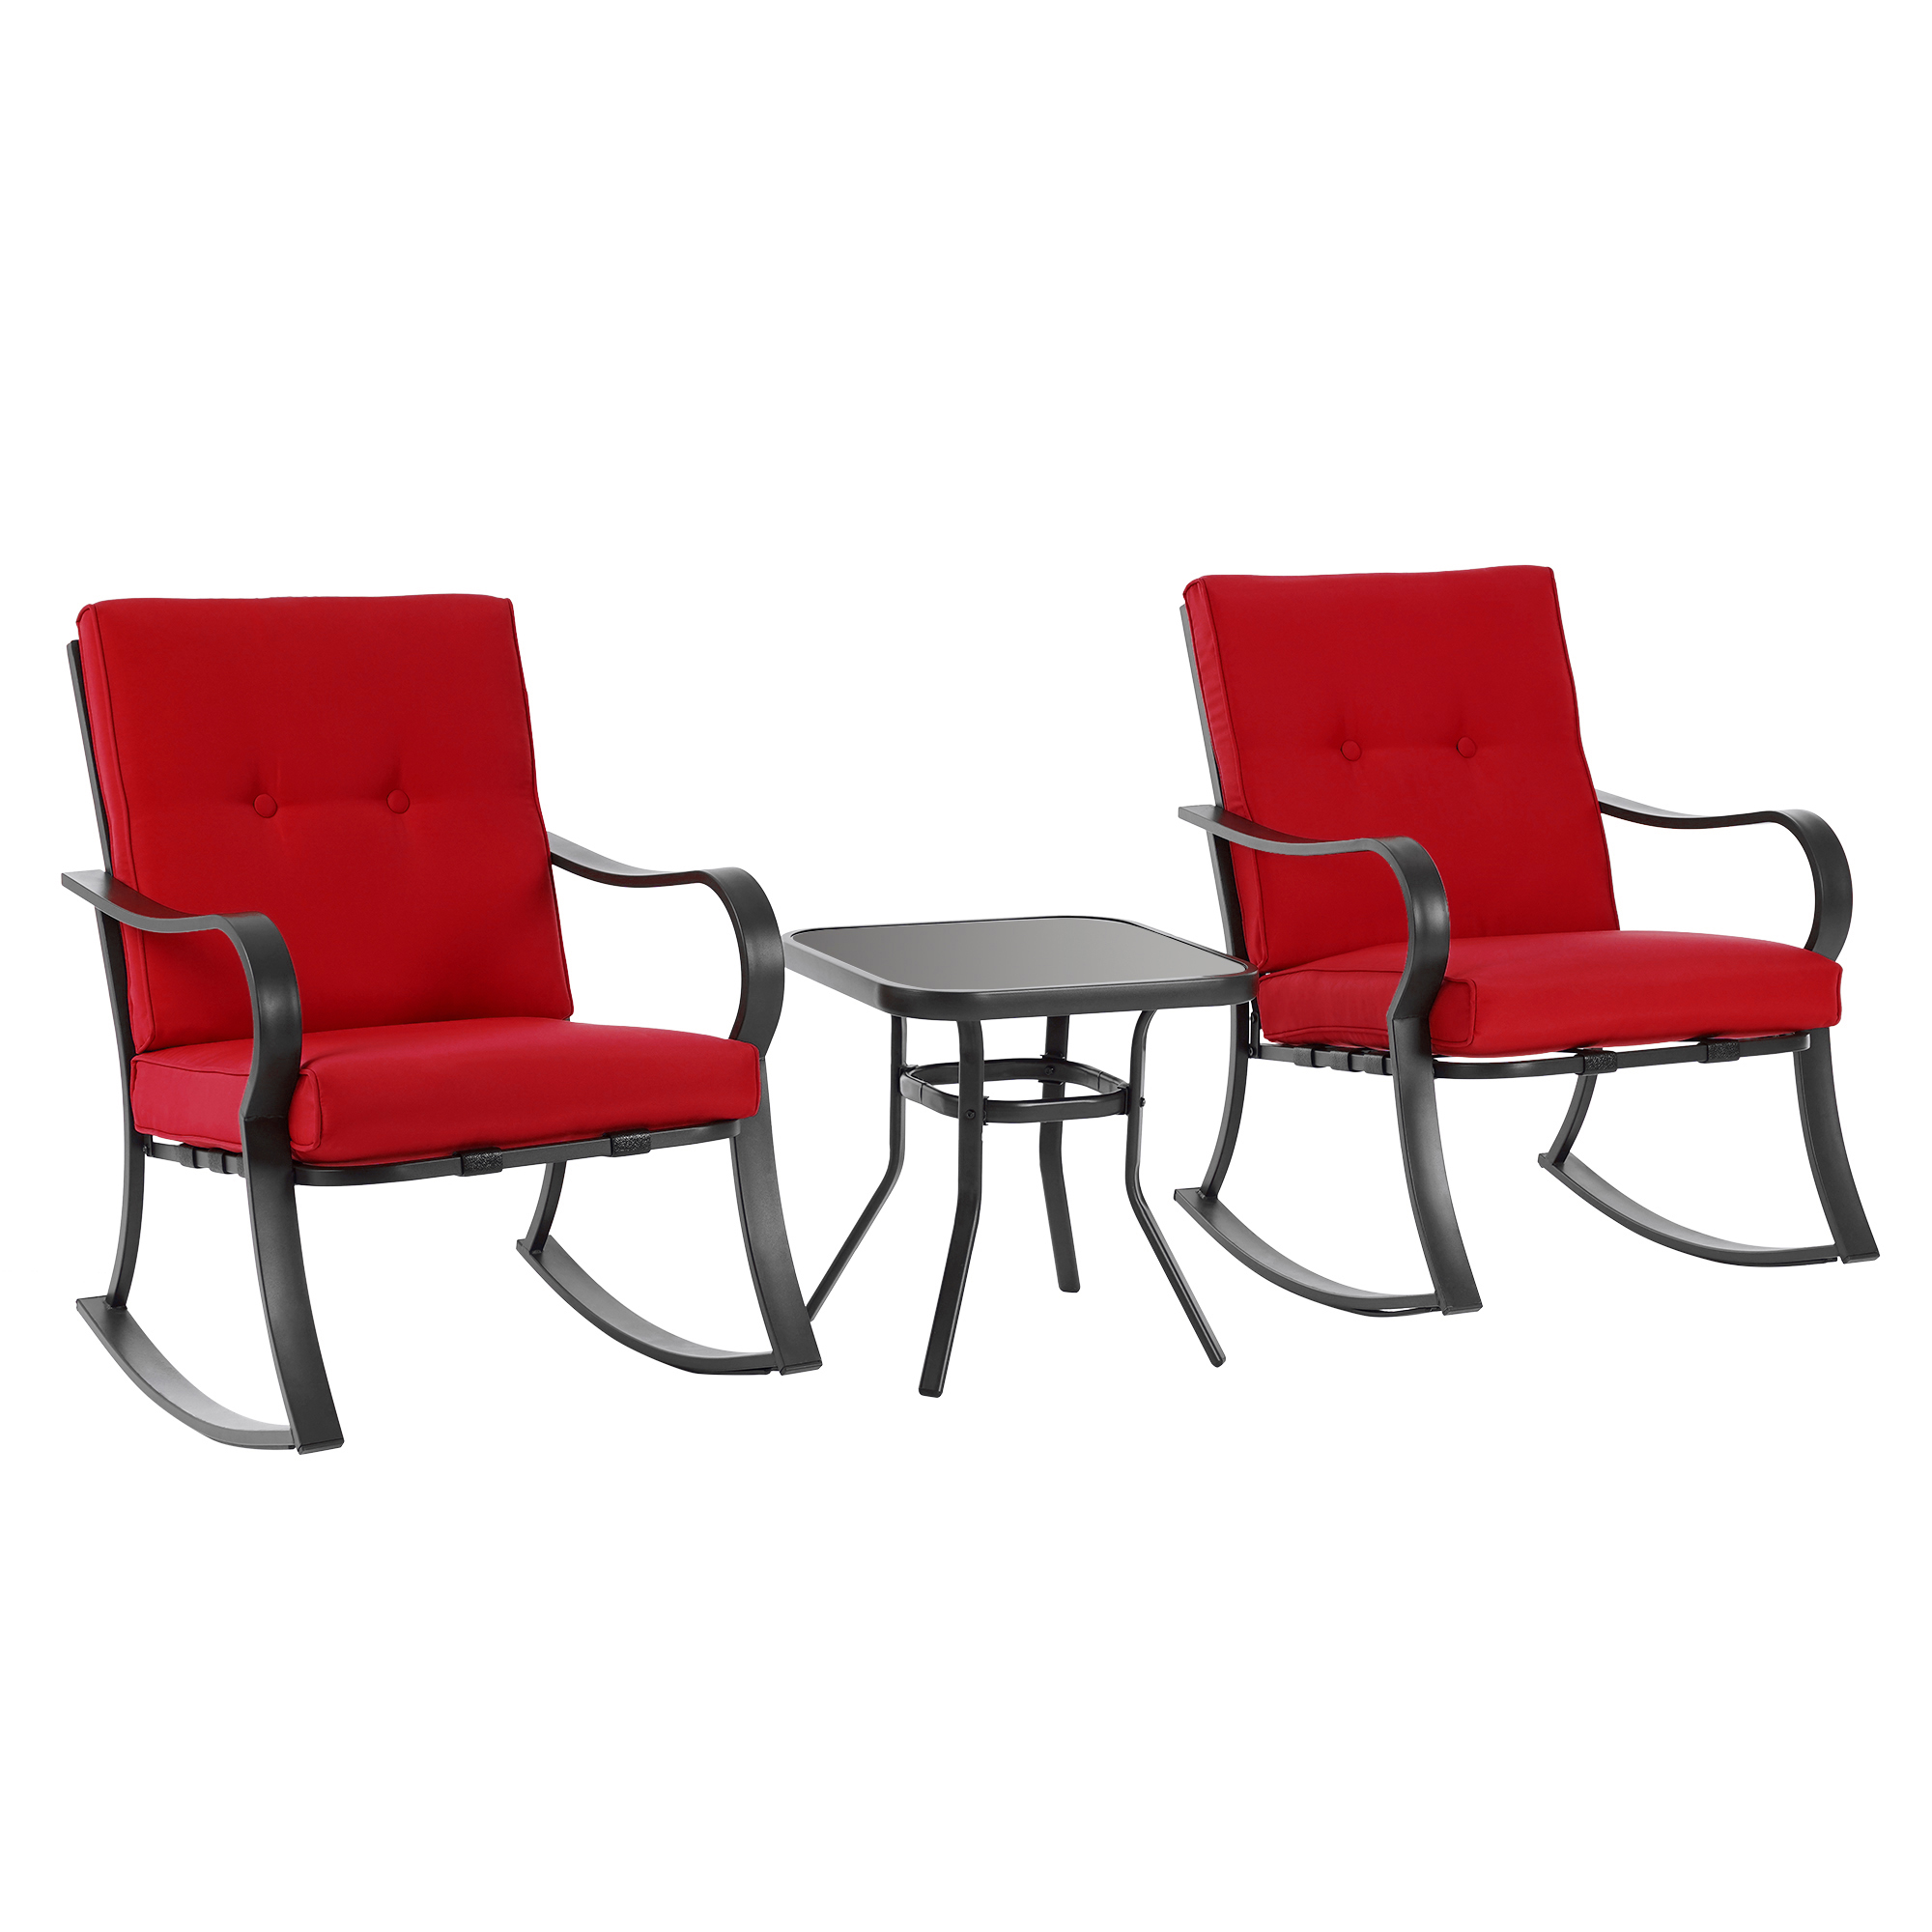 CHYVARY 3 Pcs Outdoor Patio Steel Lounge 2 Rocking Soft Chair Sets with Tempered Glass Table for Patio and Garden,Red - image 3 of 8